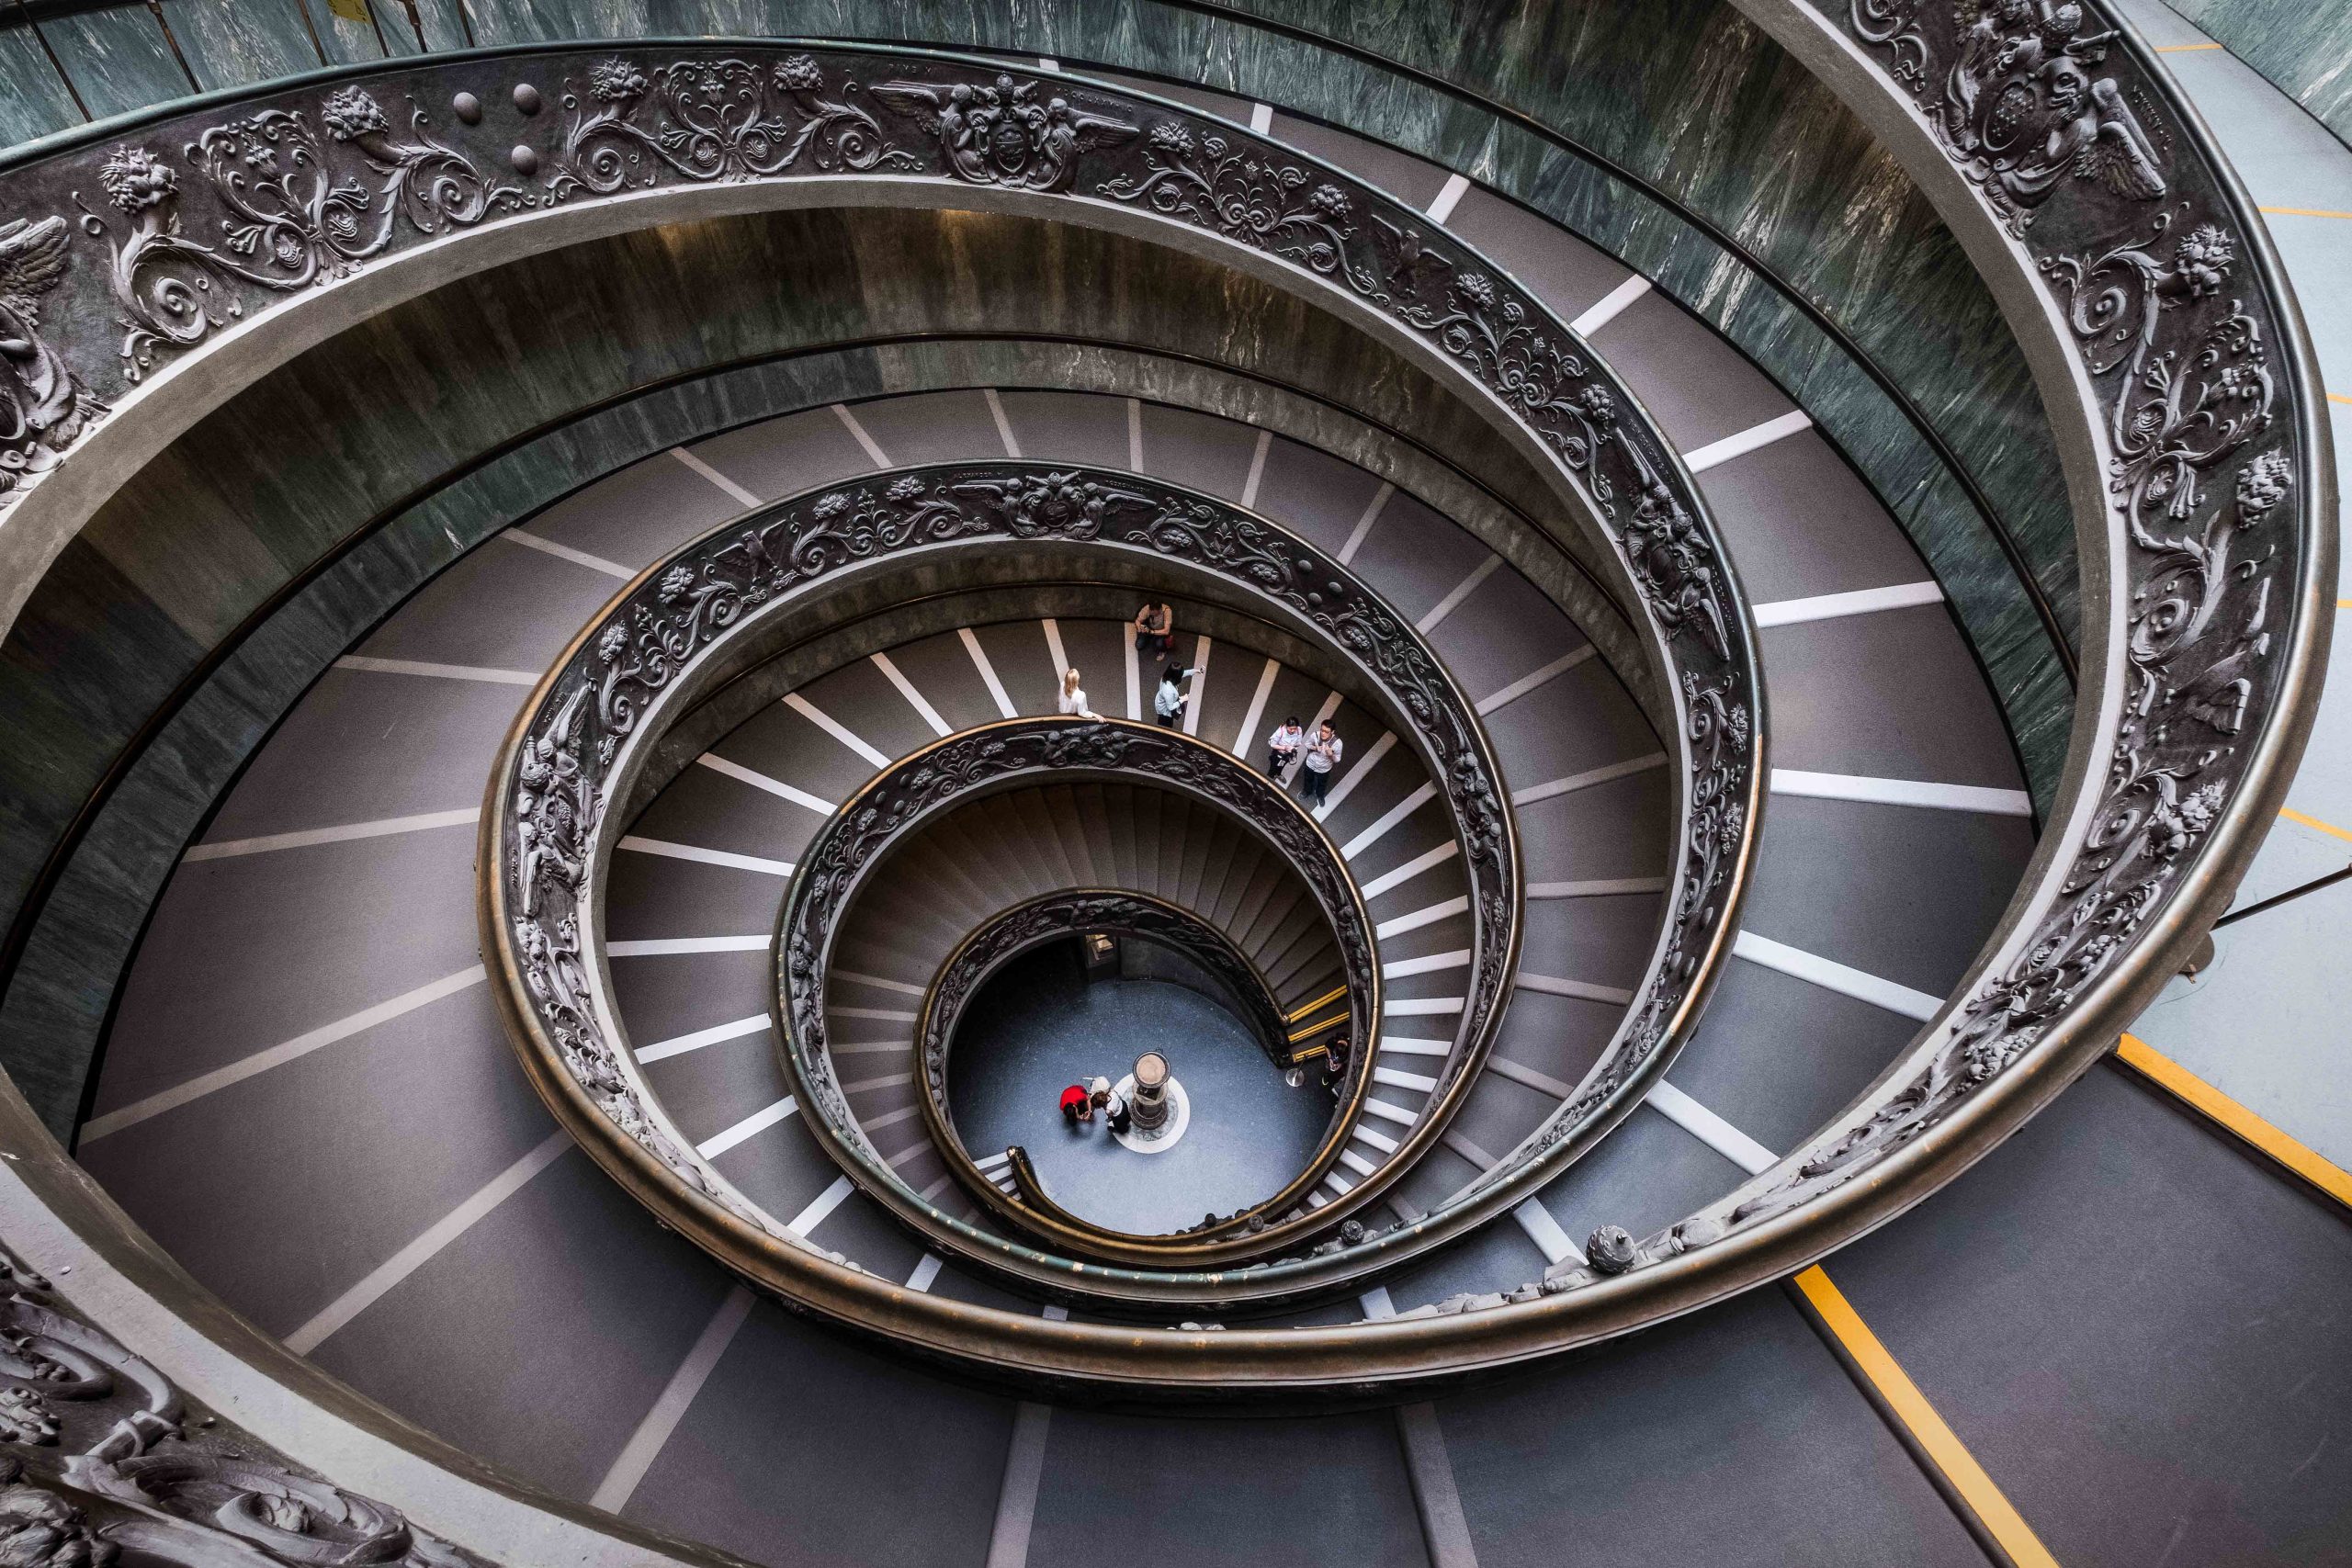 Strategies for Capturing Stunning Architectural Photography